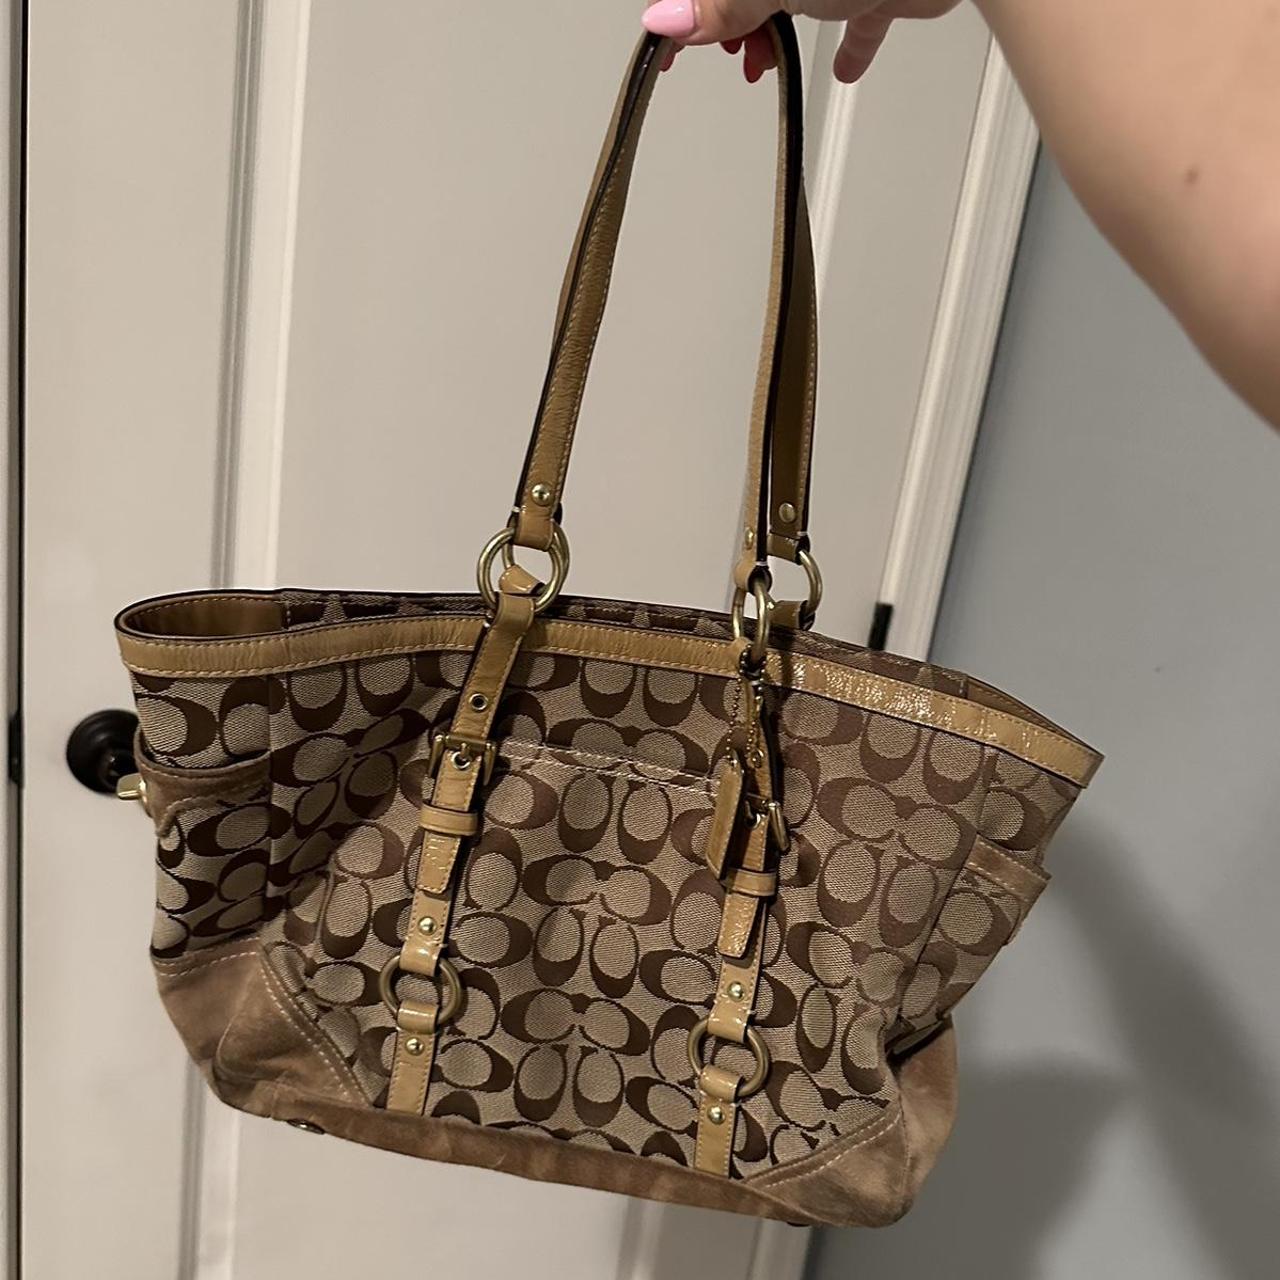 Vintage Coach bag from early 2000s.